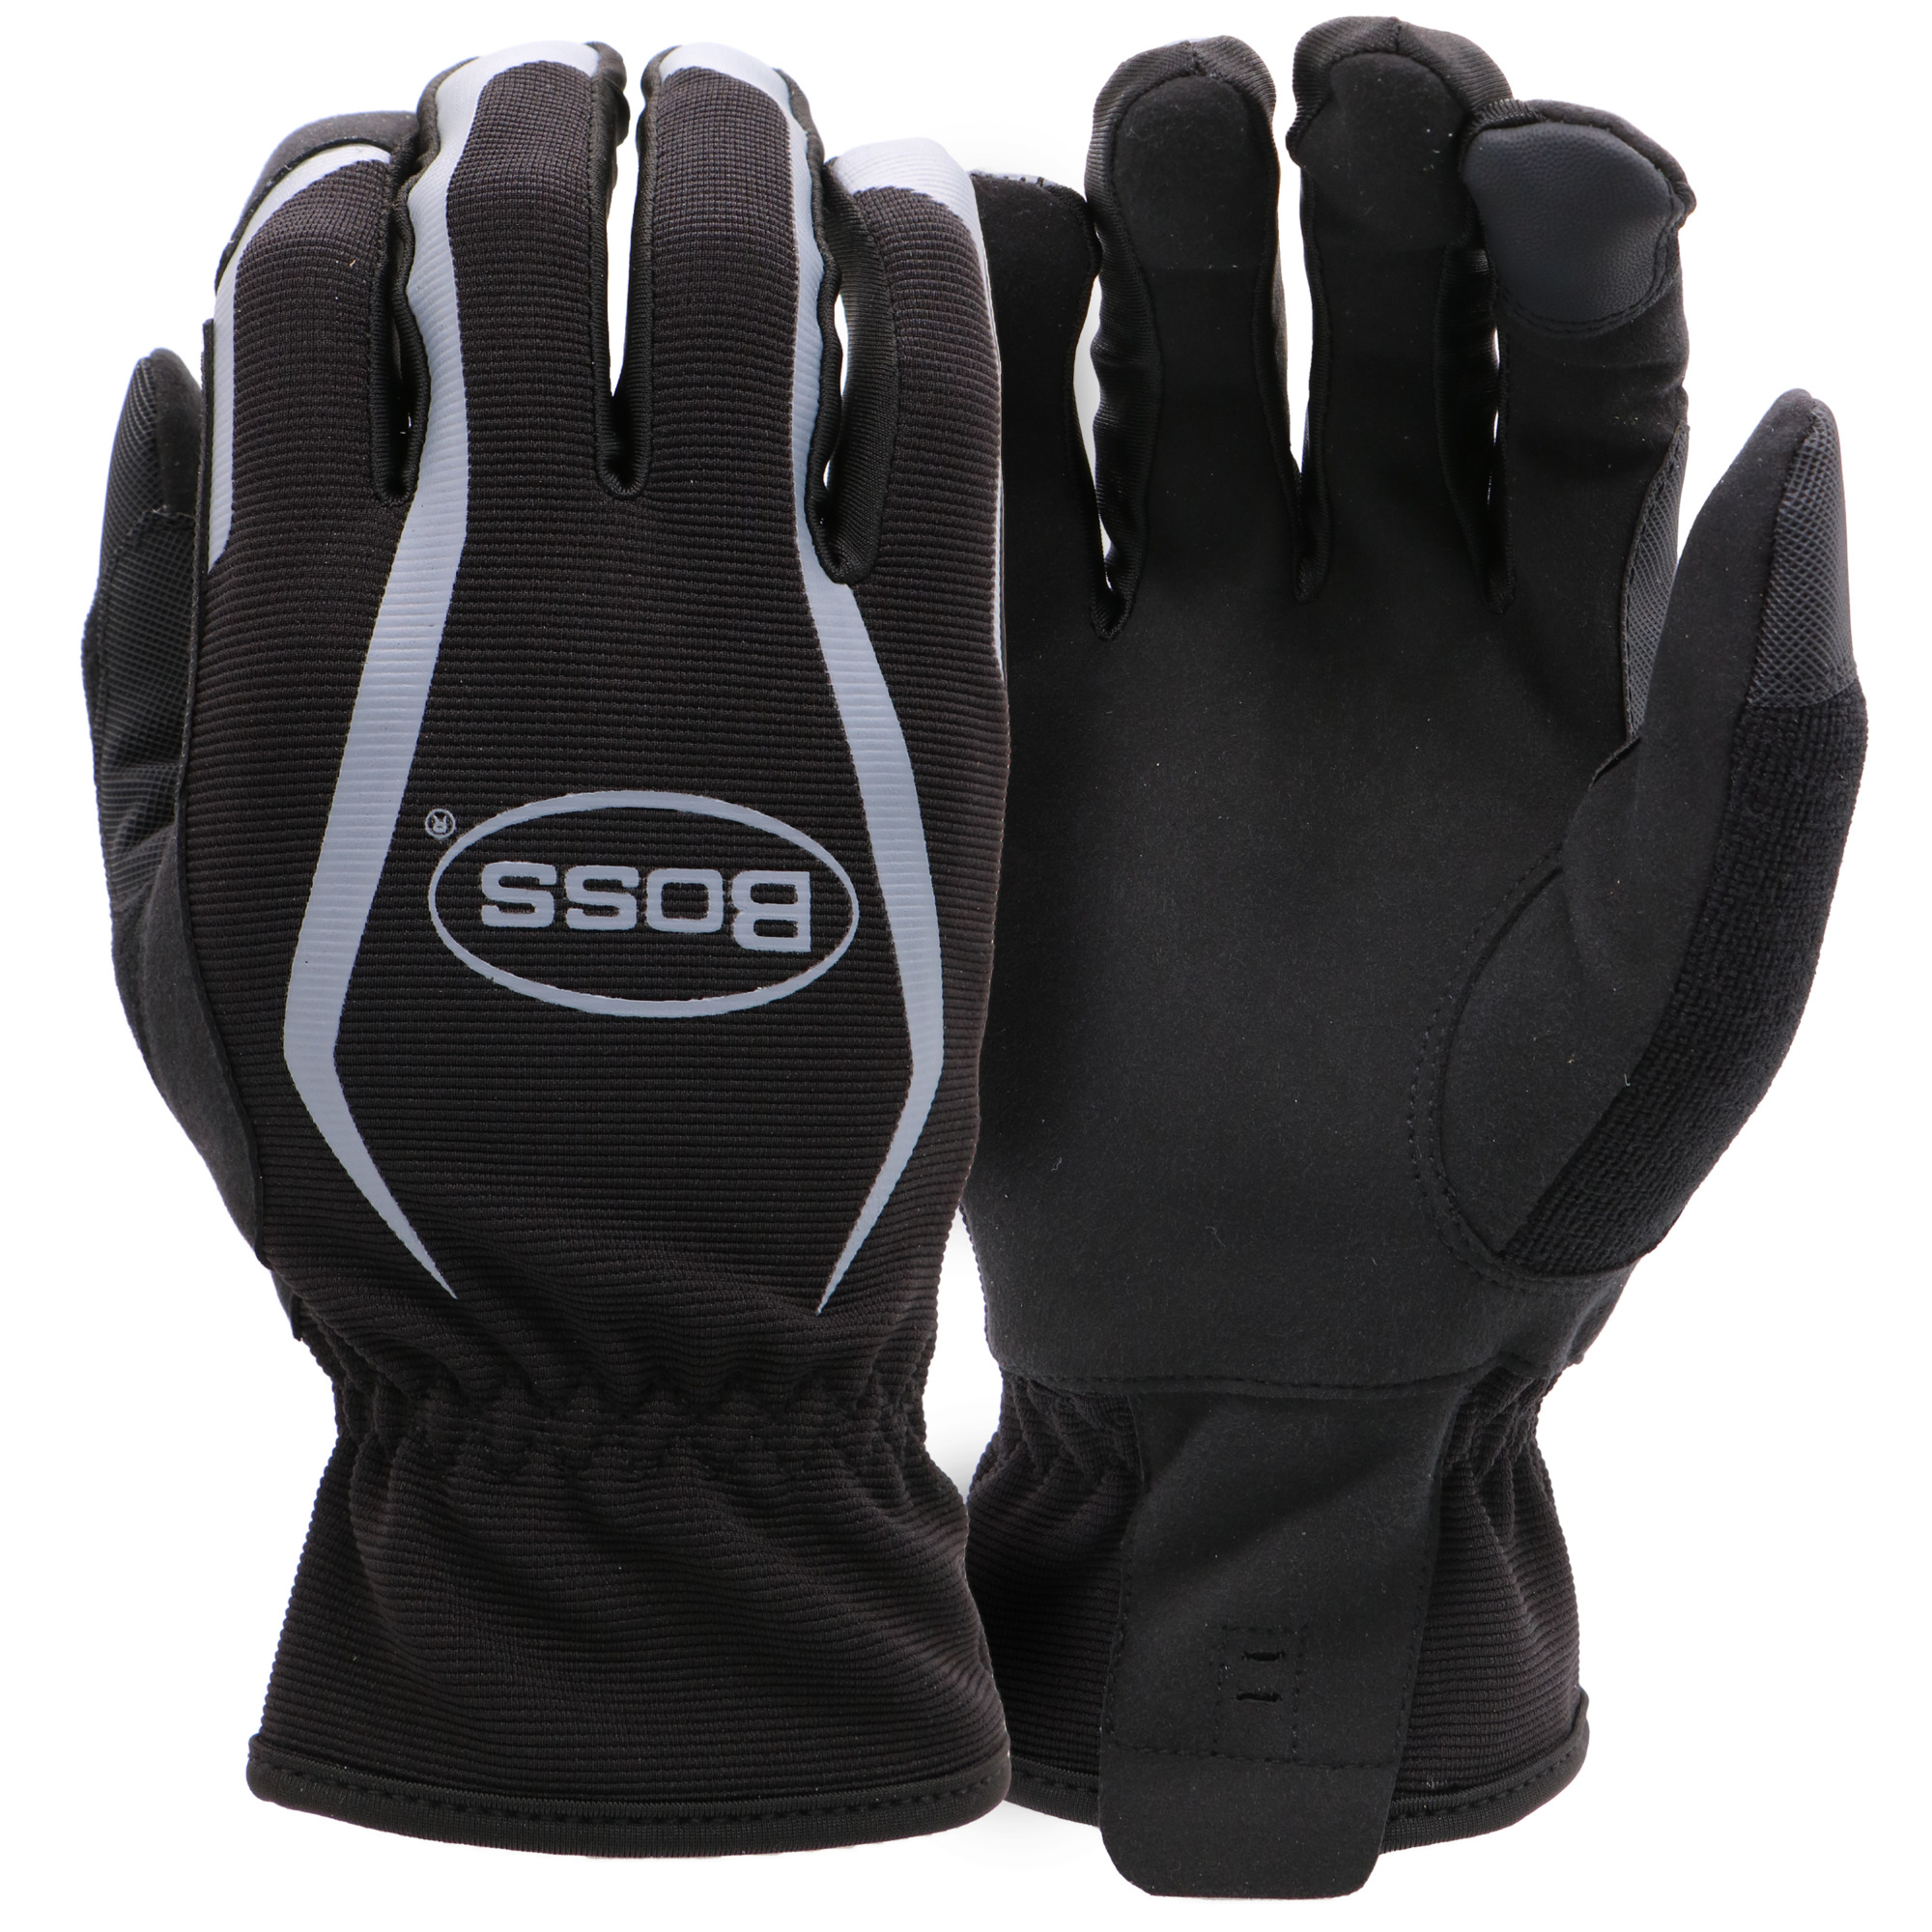 Boss, Extreme Hi Performance with synthetic leather, Size XL, Color Black, Included (qty.) 1, Model B52031-XL